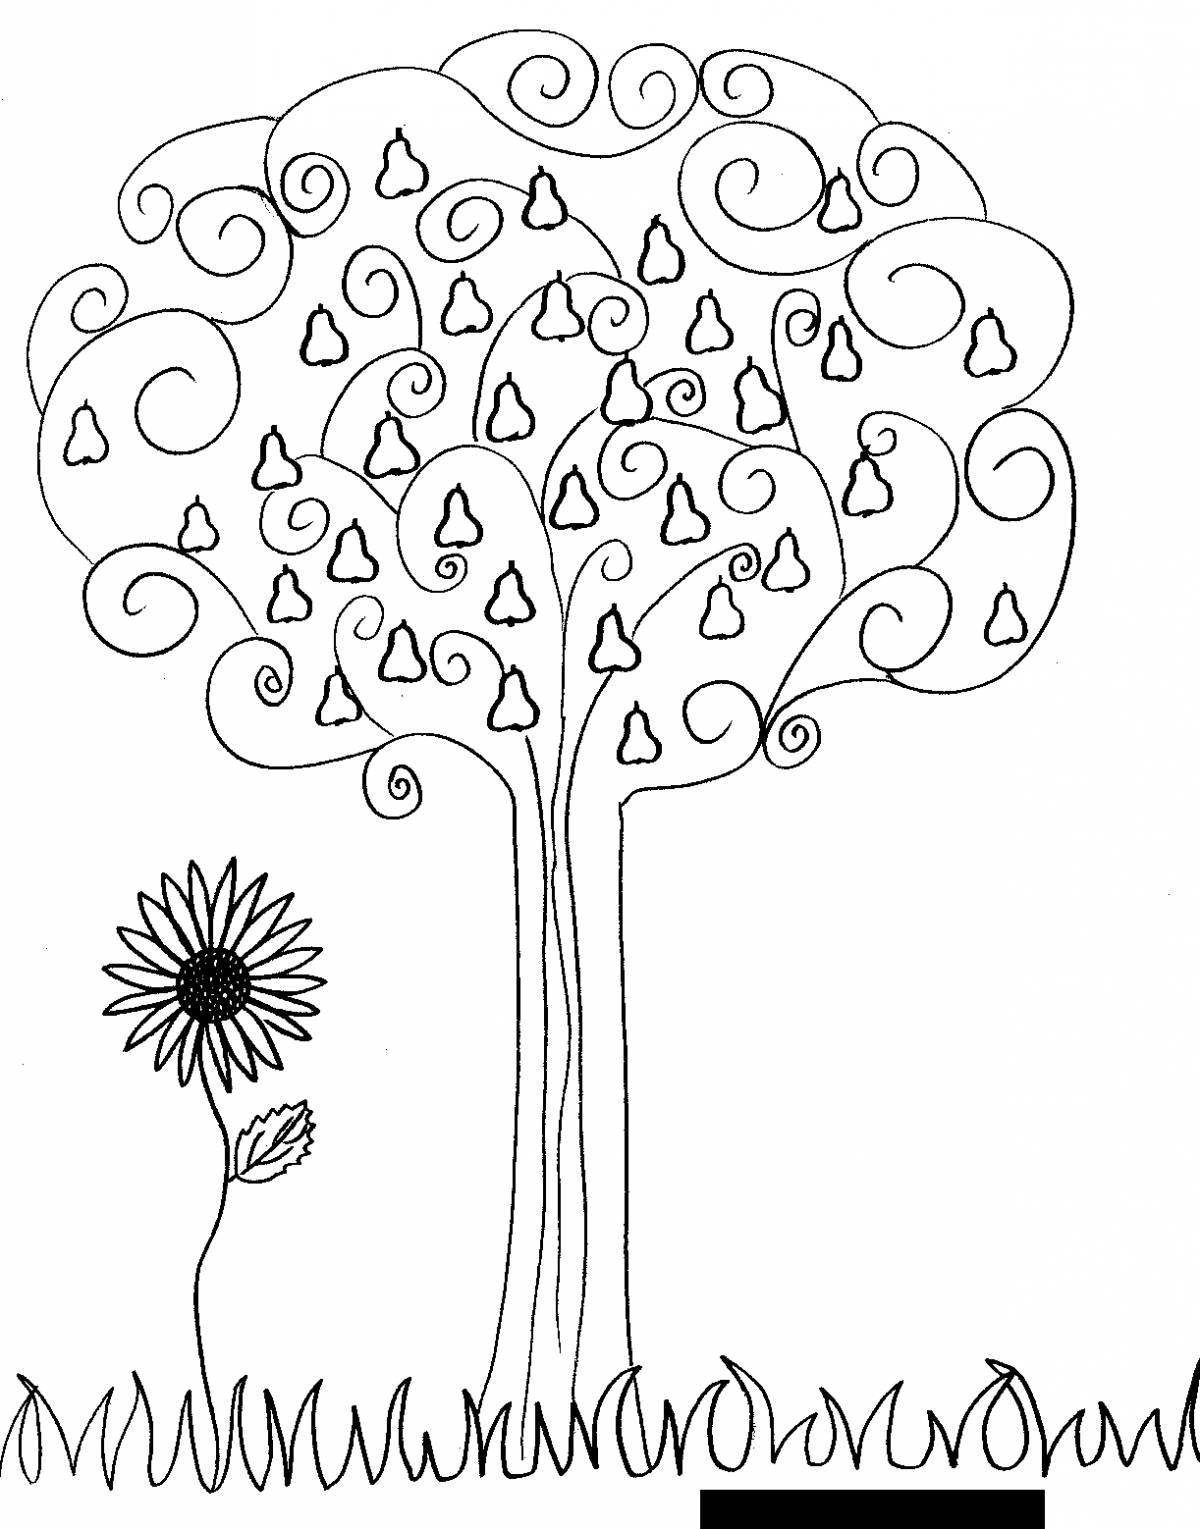 Bright tree coloring book for children 6-7 years old